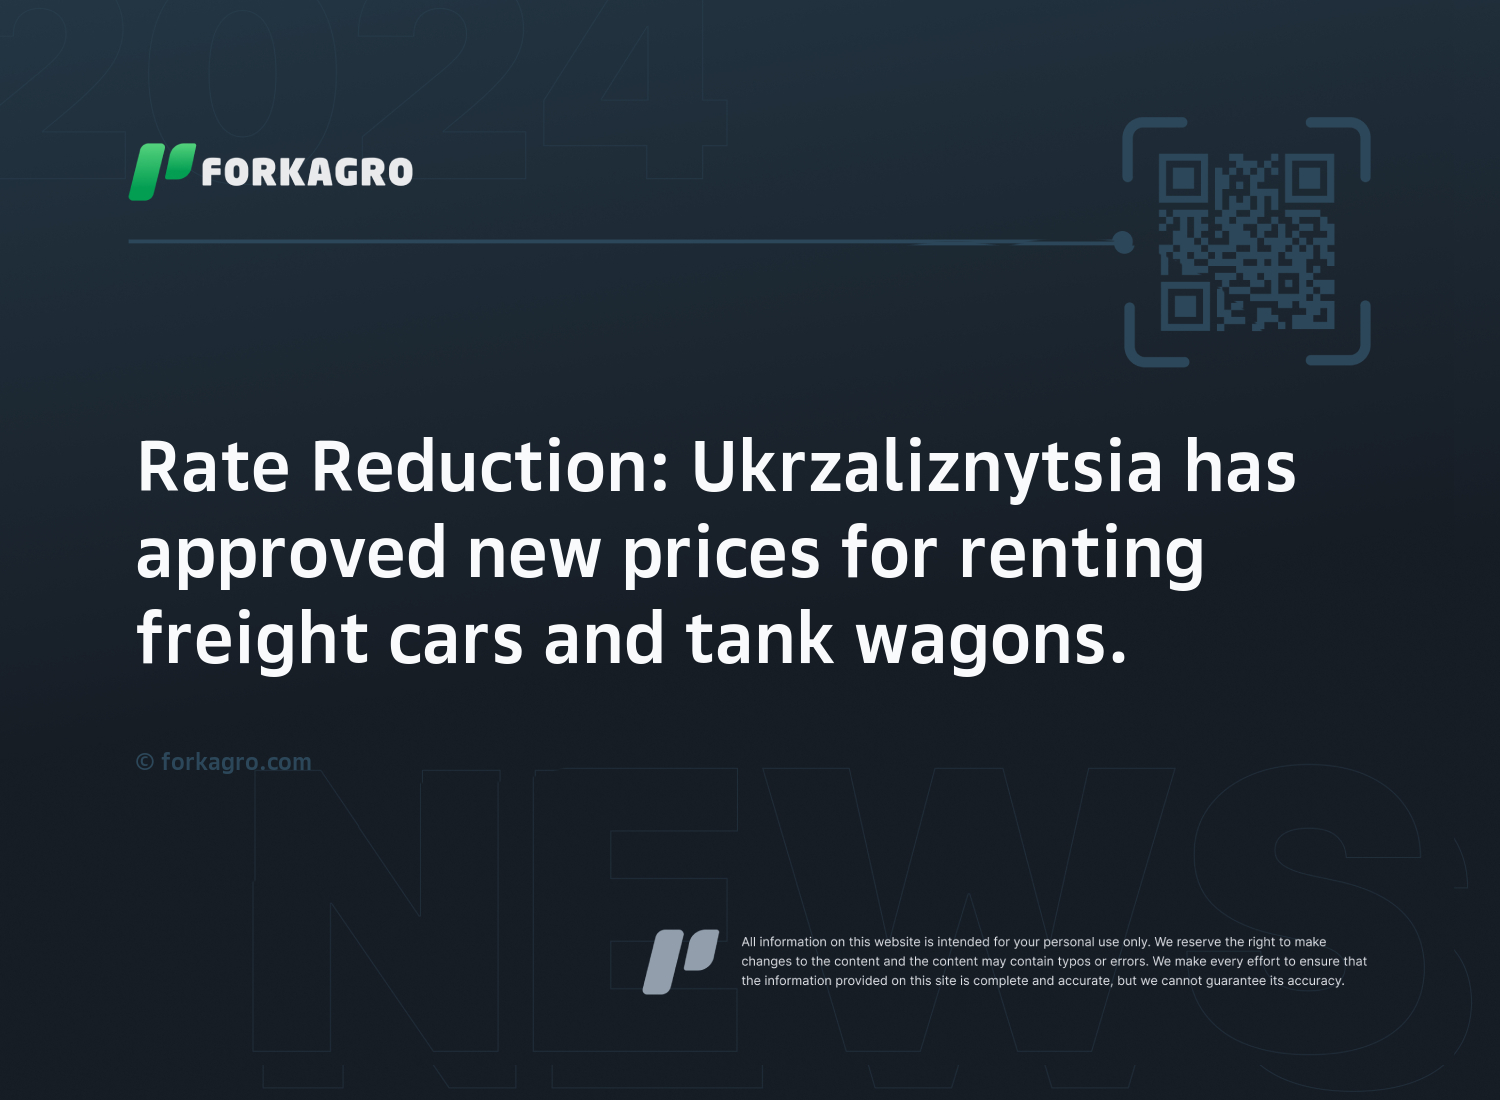 Rate Reduction: Ukrzaliznytsia has approved new prices for renting freight cars and tank wagons.